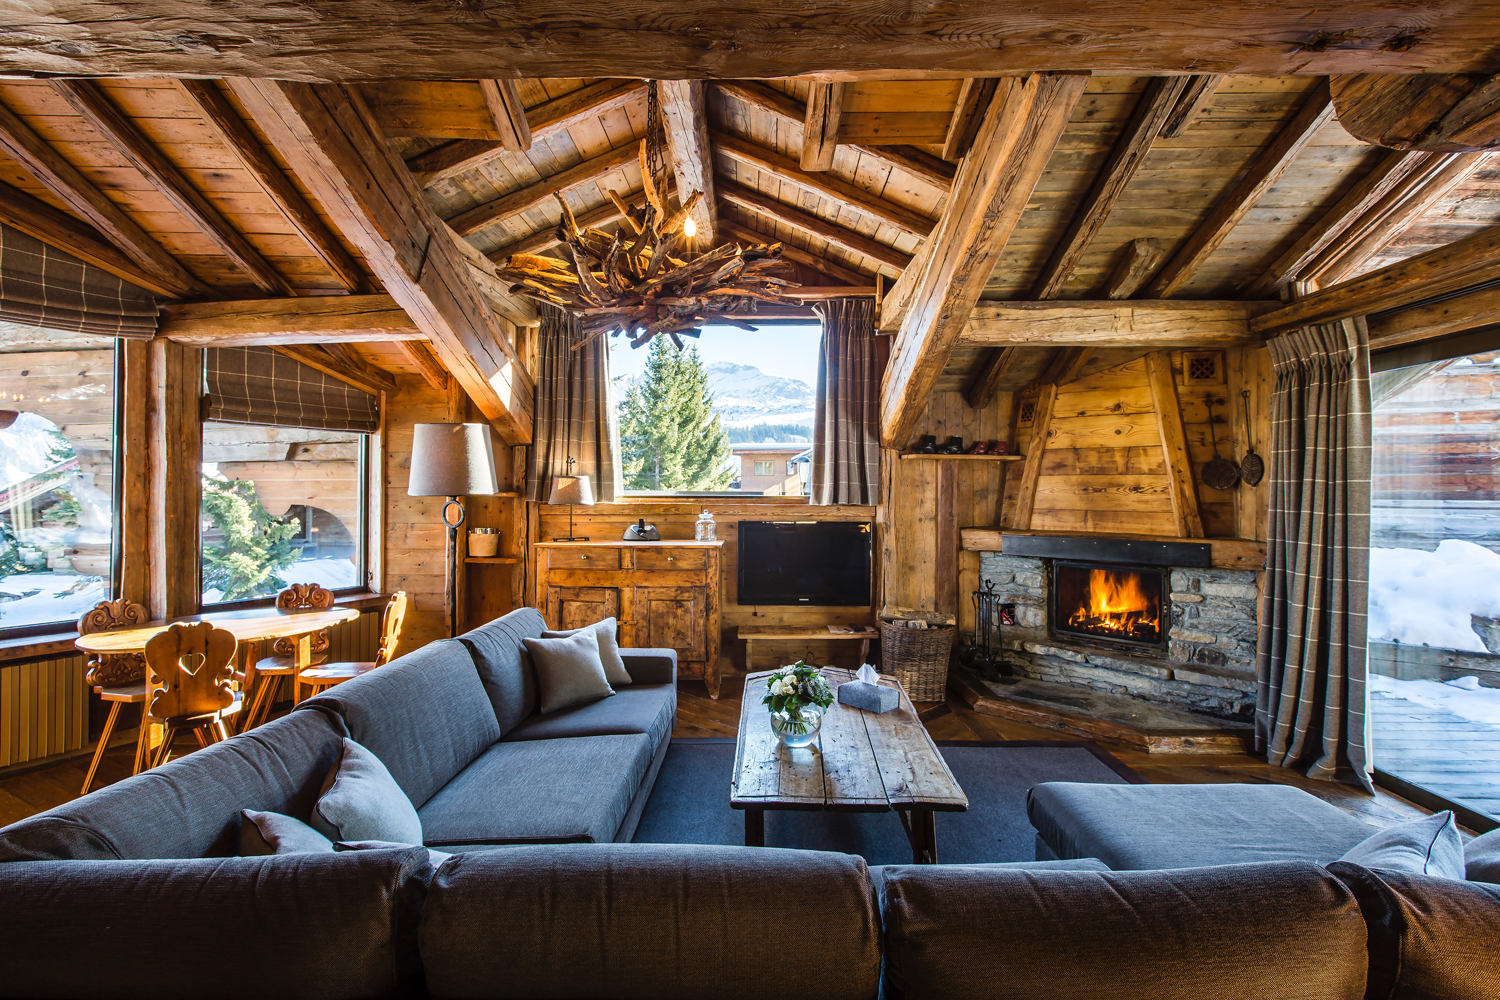 A Luxury Chalet in Courchevel, France